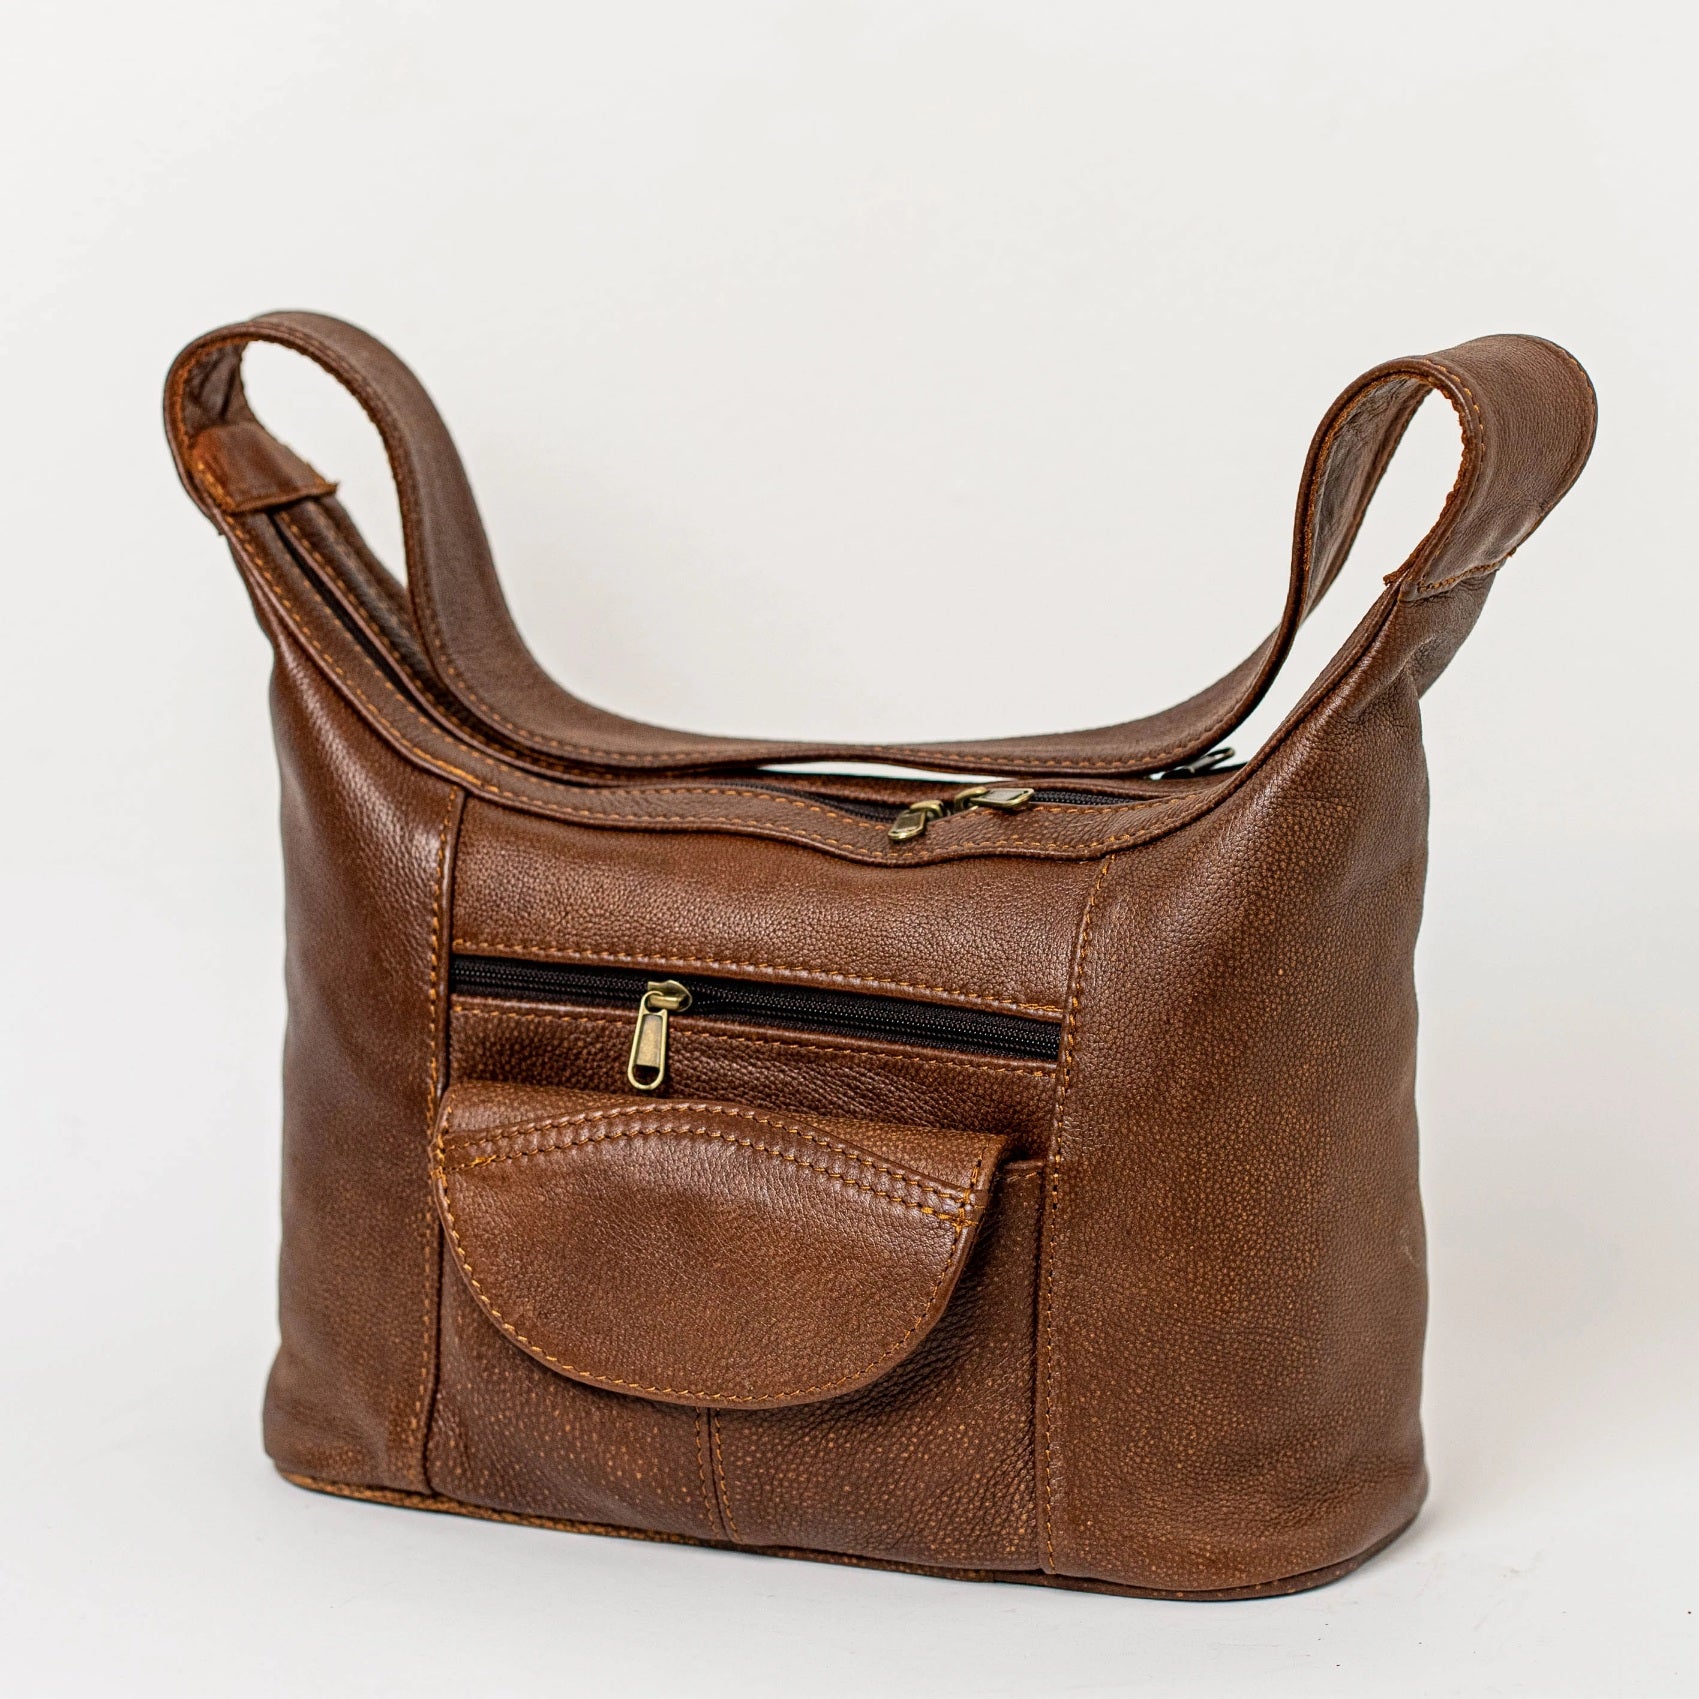 Gb7 leather bags with flap in bitter brown made by cape Masai Leather